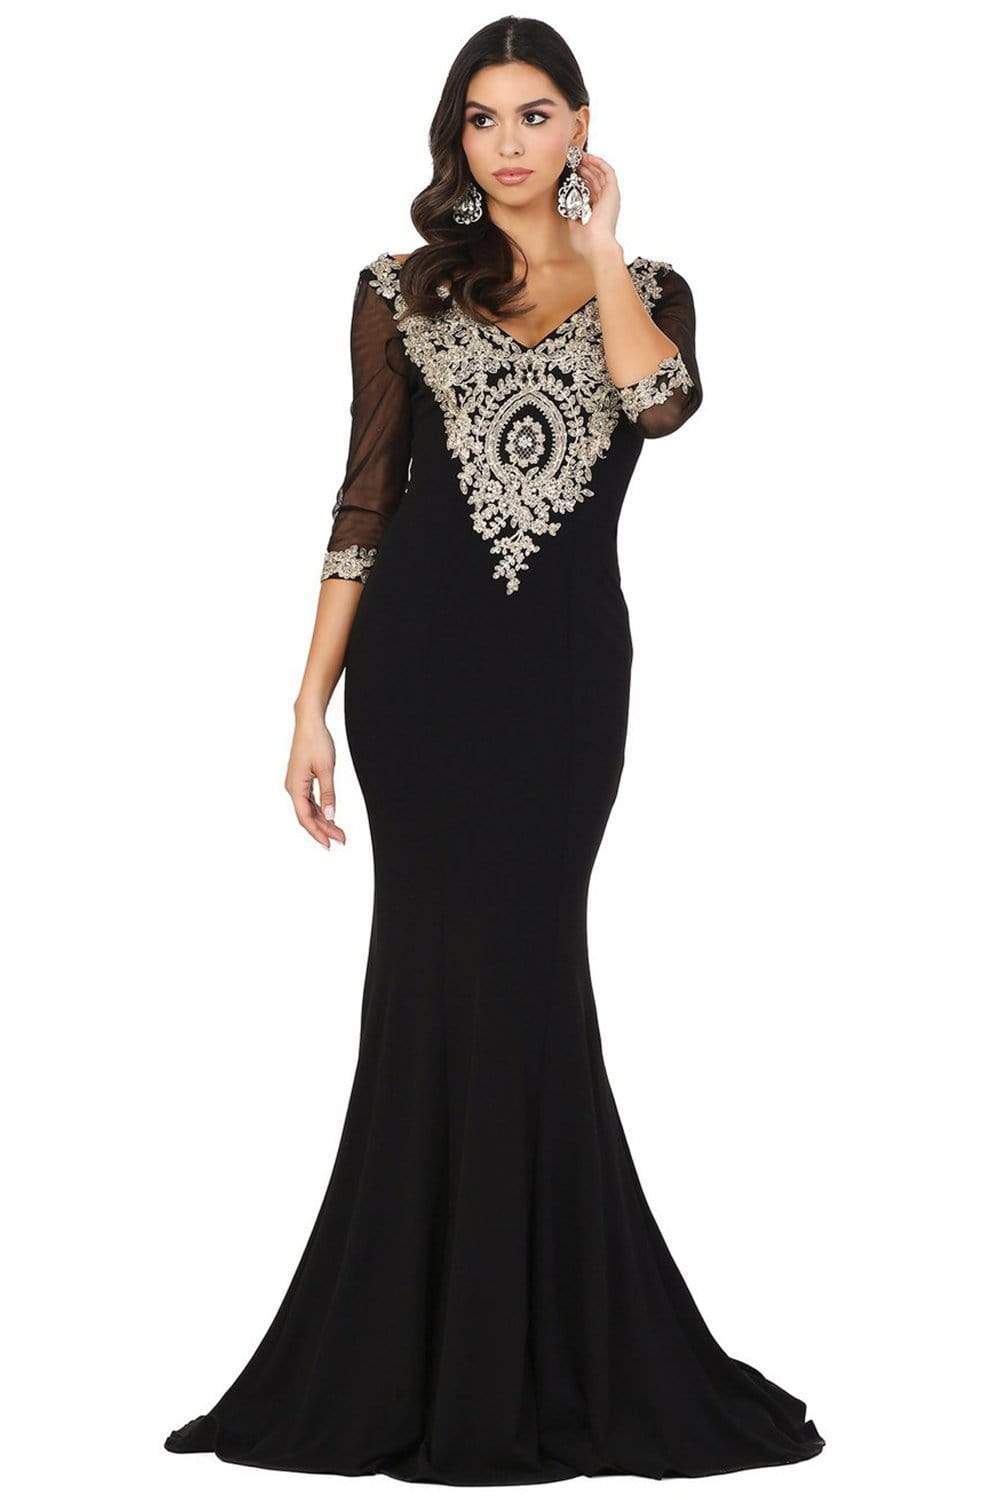 Image of Dancing Queen - 2911 Lace Appliqued V Neck Mermaid Prom Dress